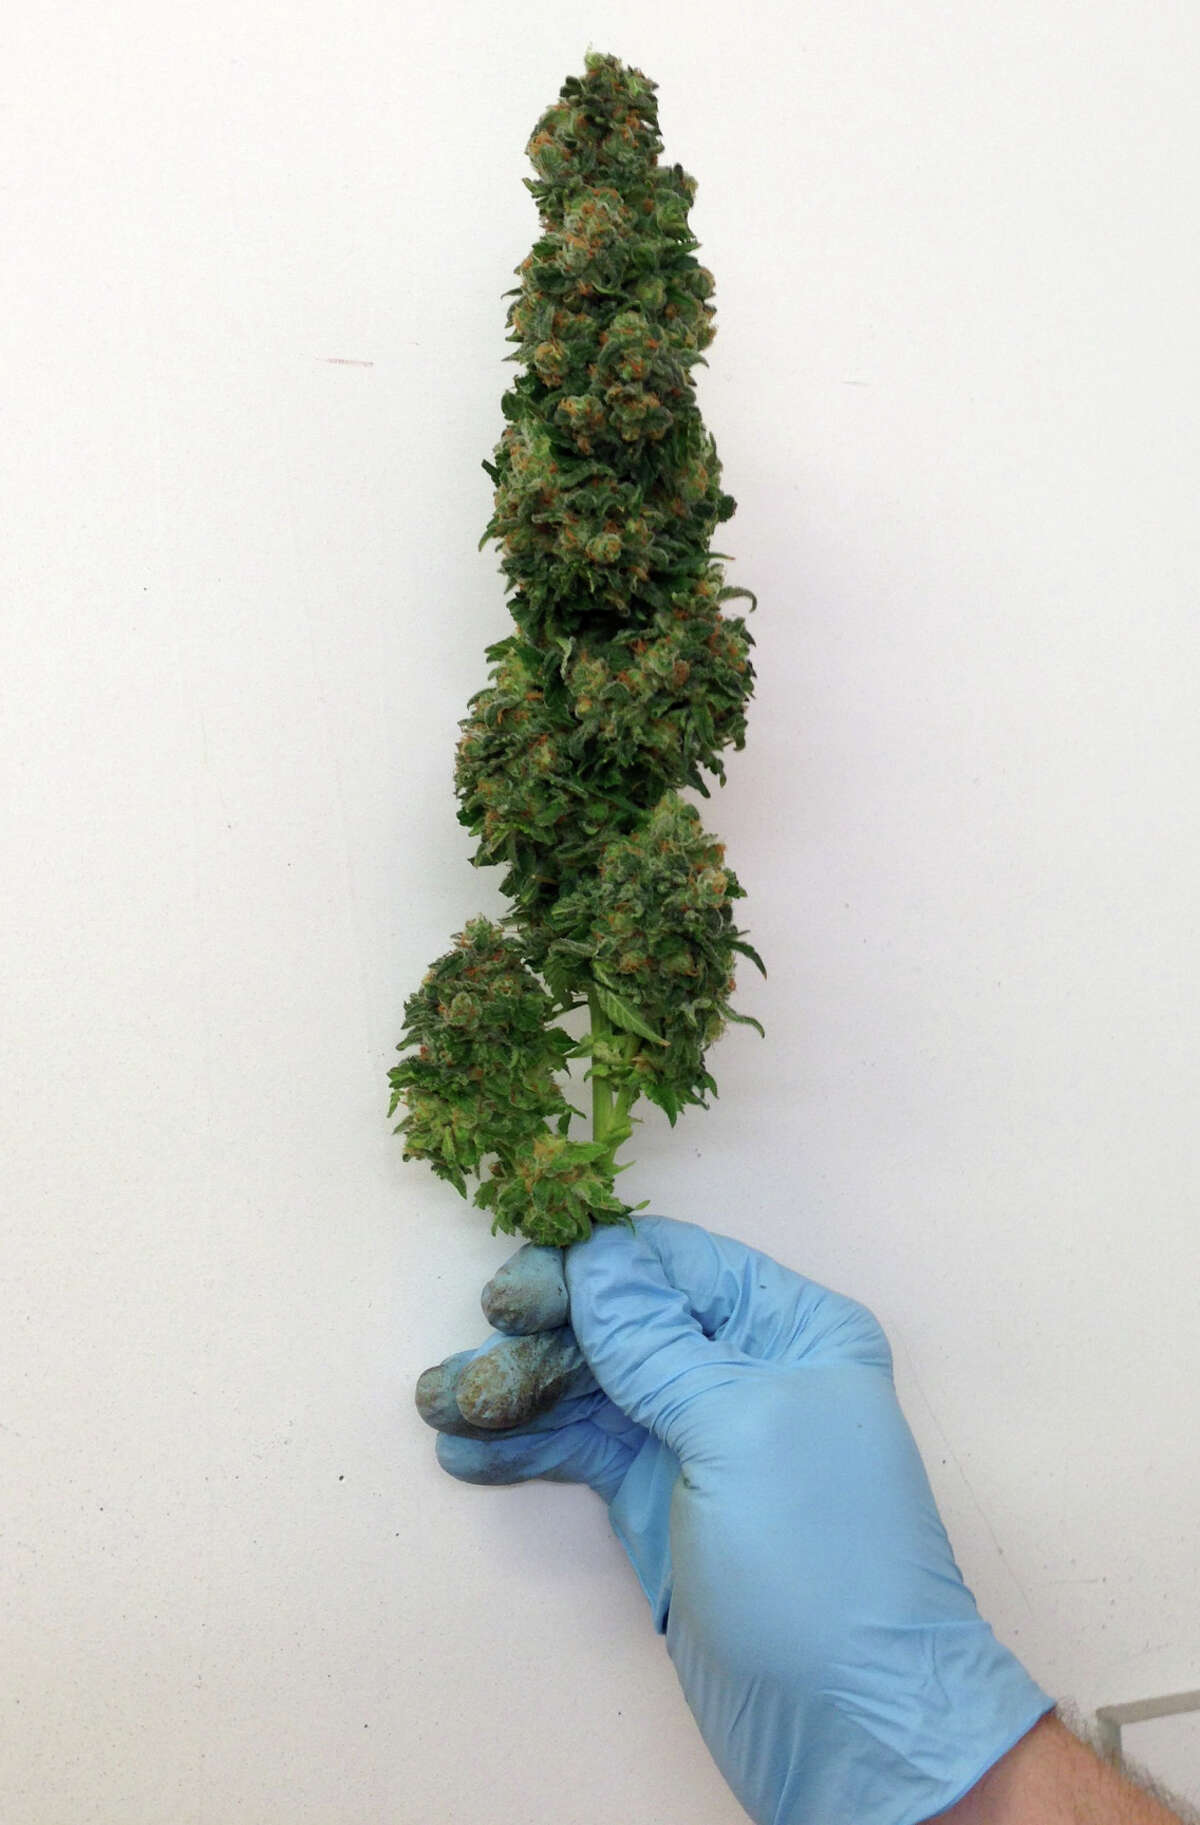 A marijuana plant bud from a test batch grown in Colorado by Joseph Palmieri Jr., an Easton man founded Bridgeport based Envirogrow - a company that specializes on indoor growing systems.